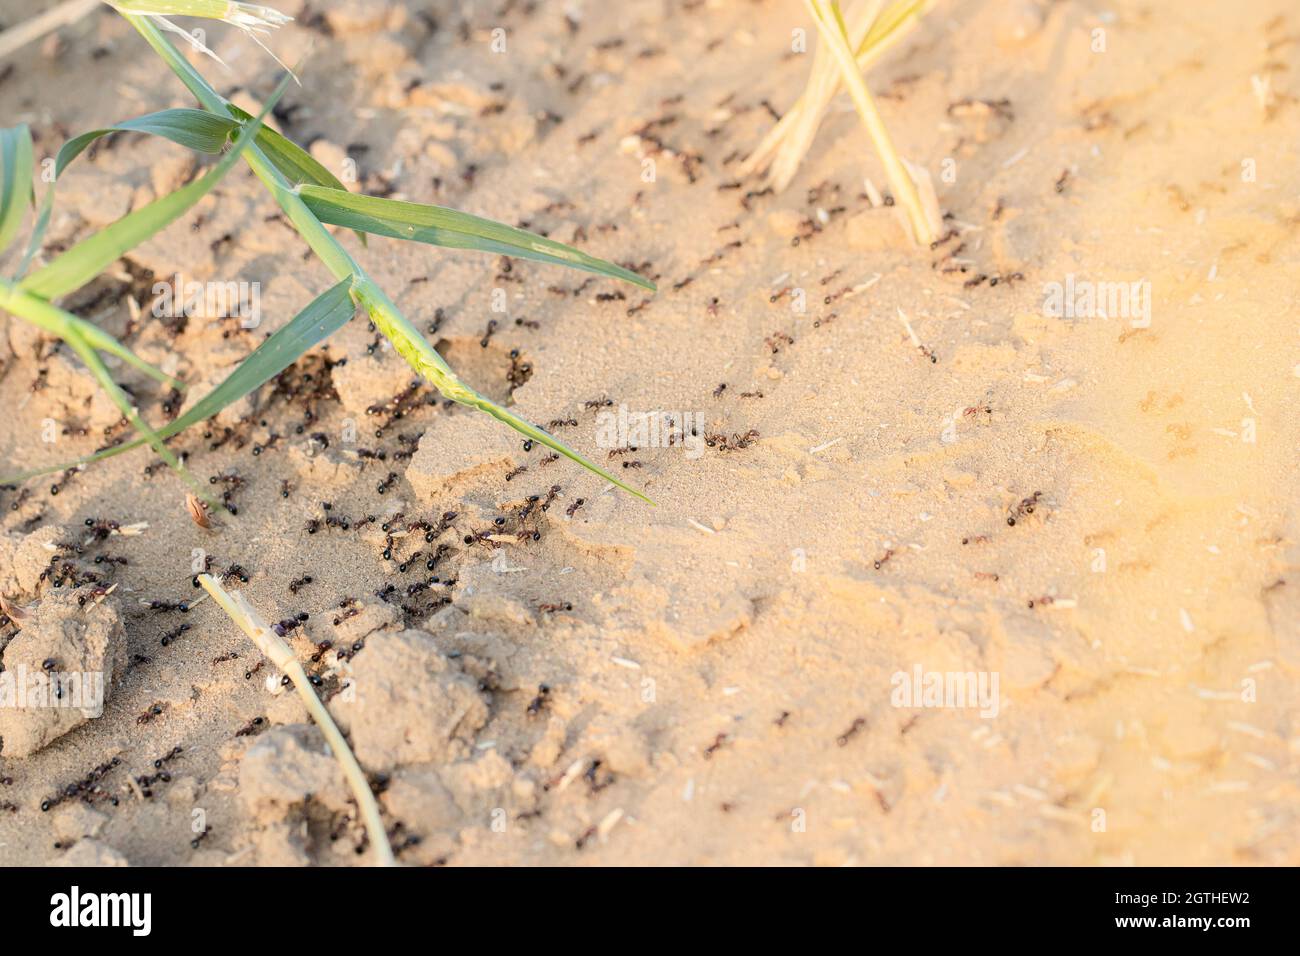 Close-up of large group of ants walking around the ant nest or ant hill in summer with light effect photo background Stock Photo